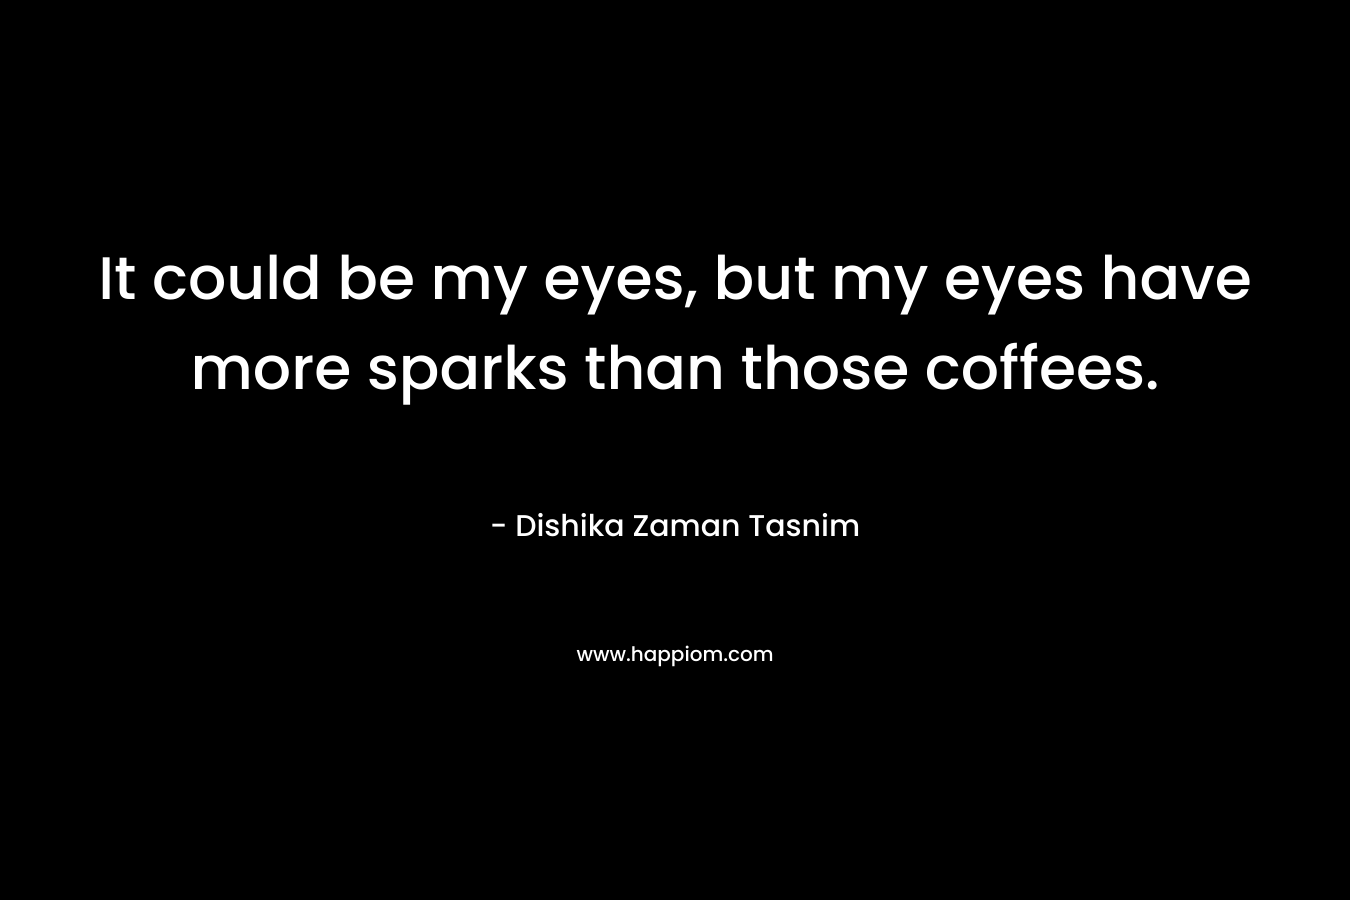 It could be my eyes, but my eyes have more sparks than those coffees.